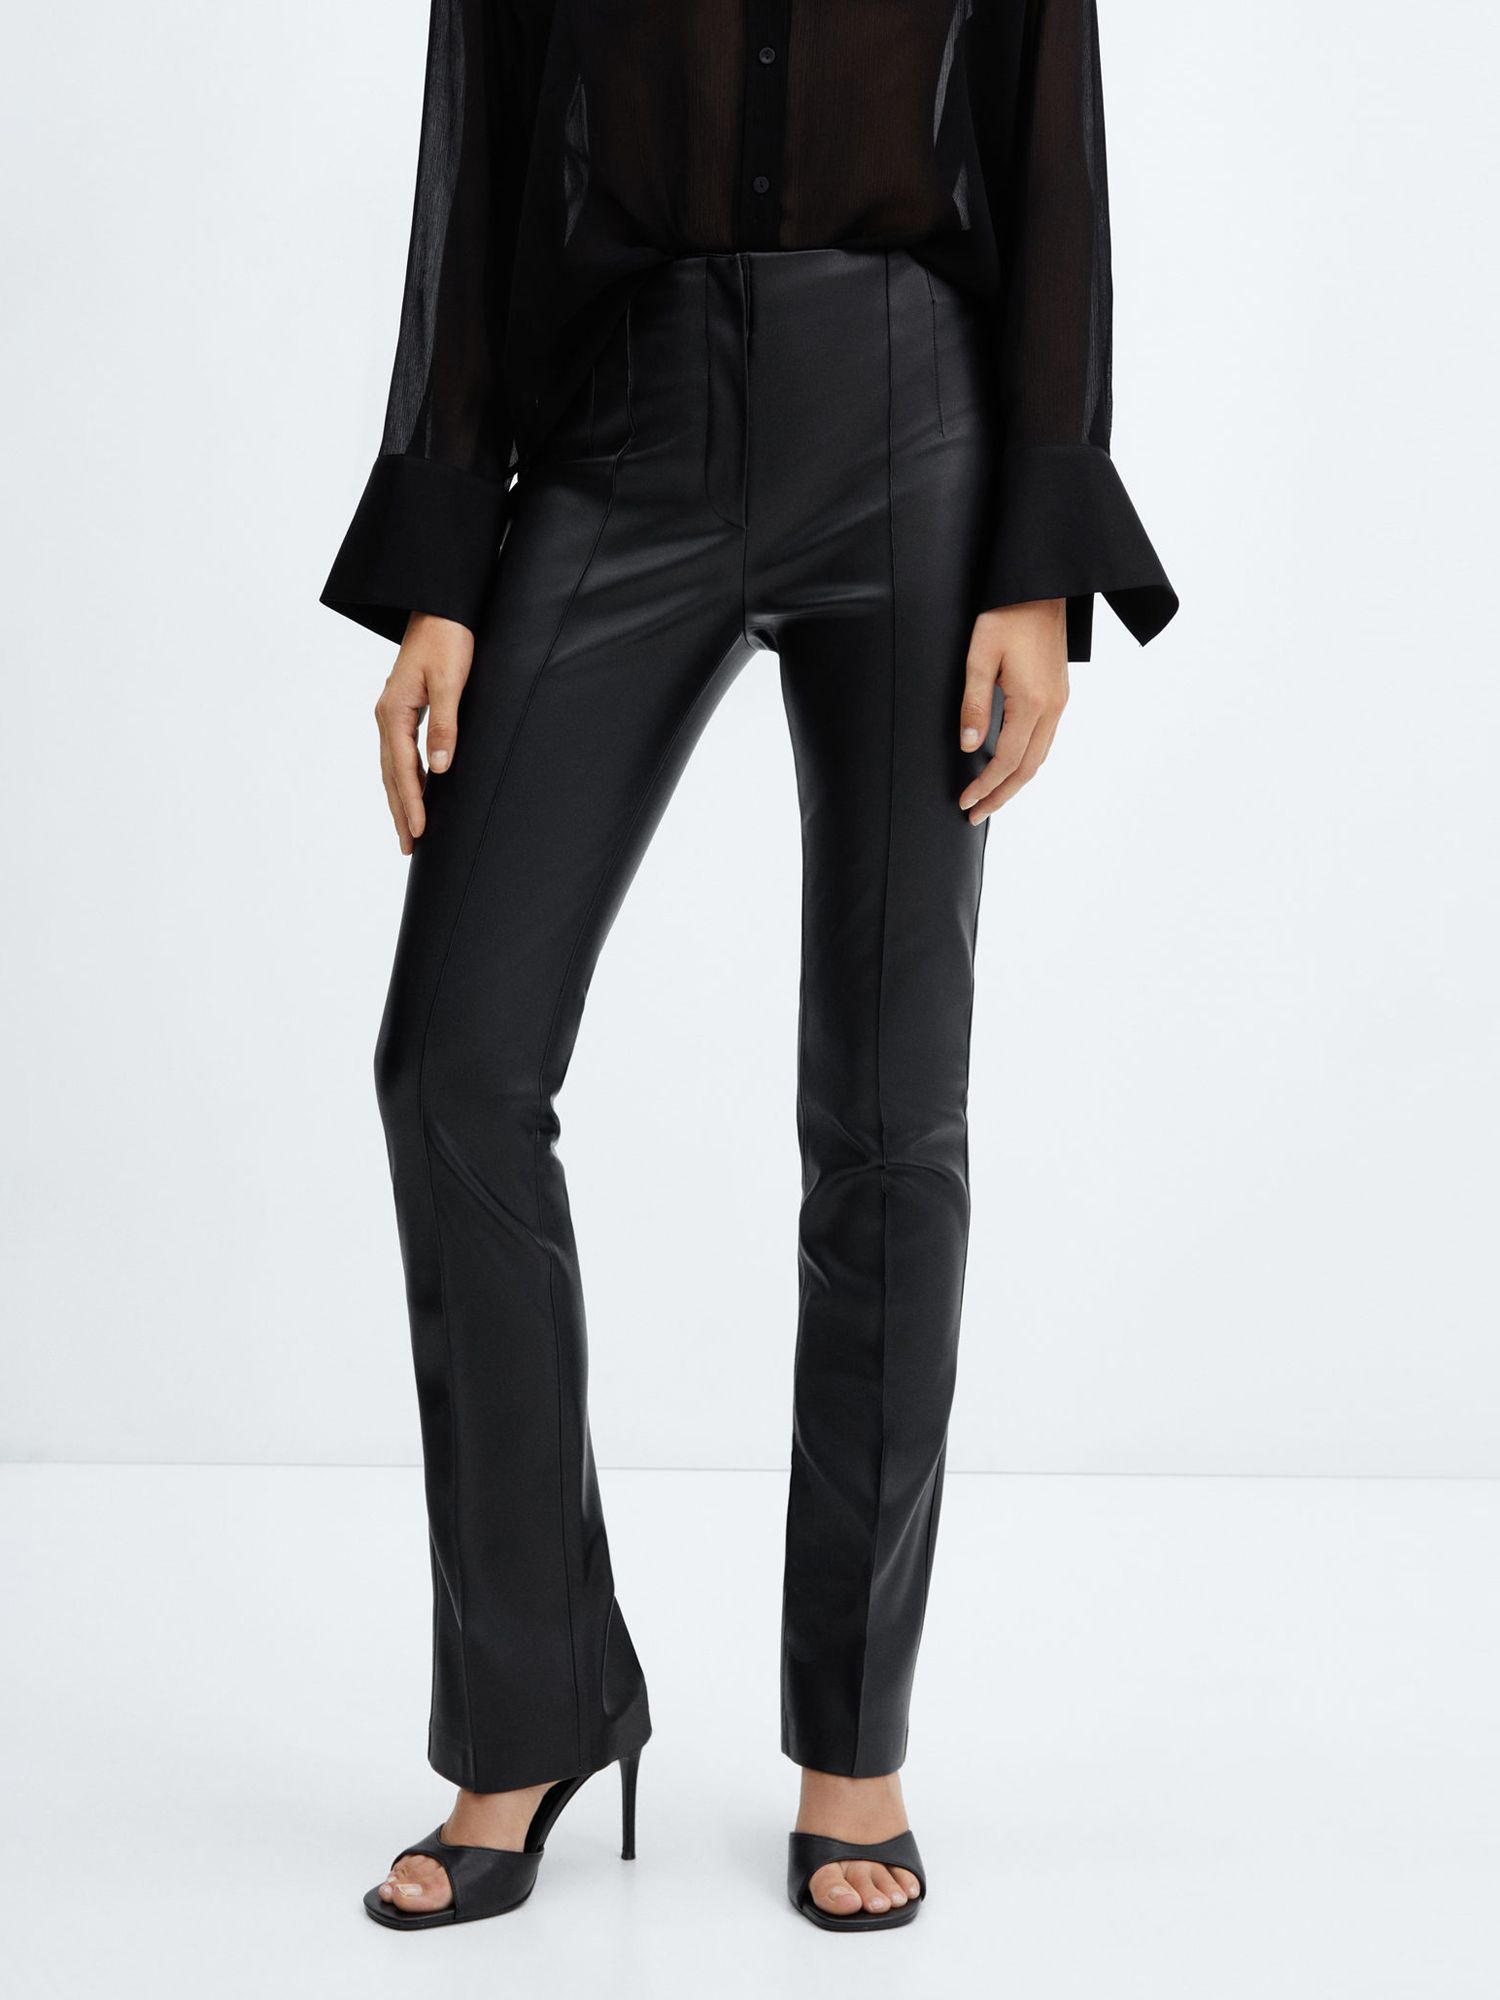 Mango Jazzy Faux Leather Trousers, Black at John Lewis & Partners